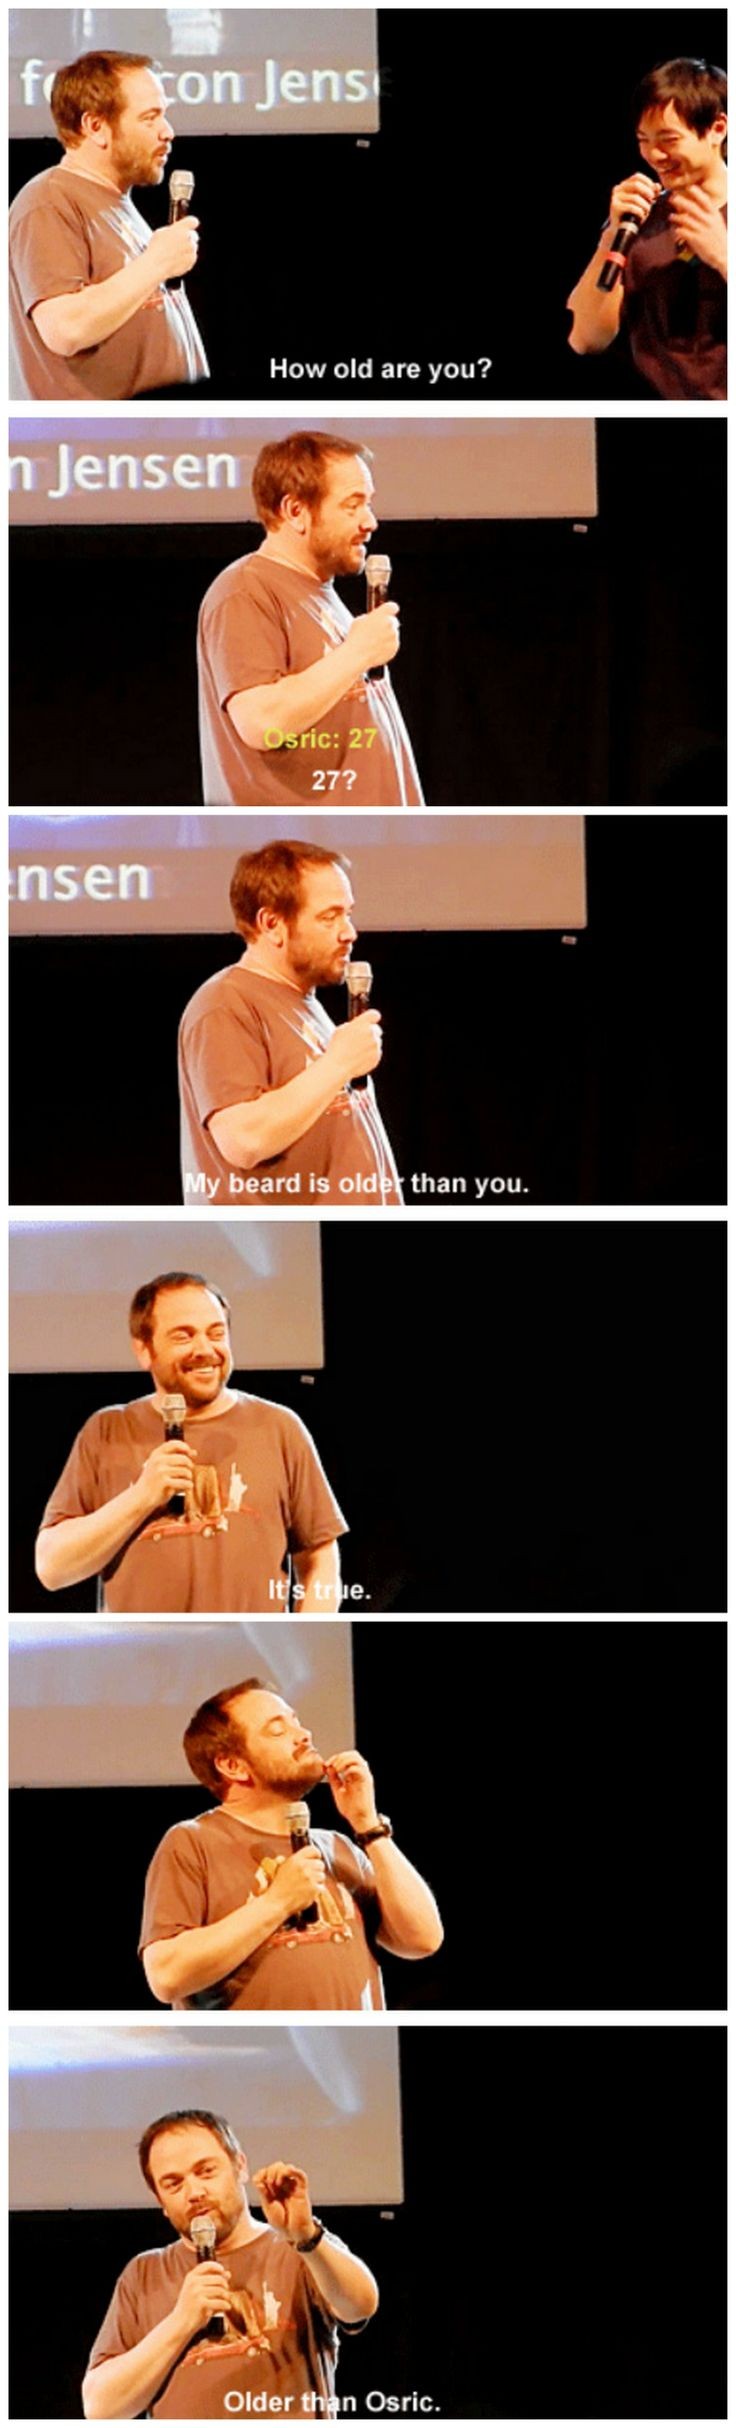 [gifset] Mark teasing Osric about his age :) #JibC...